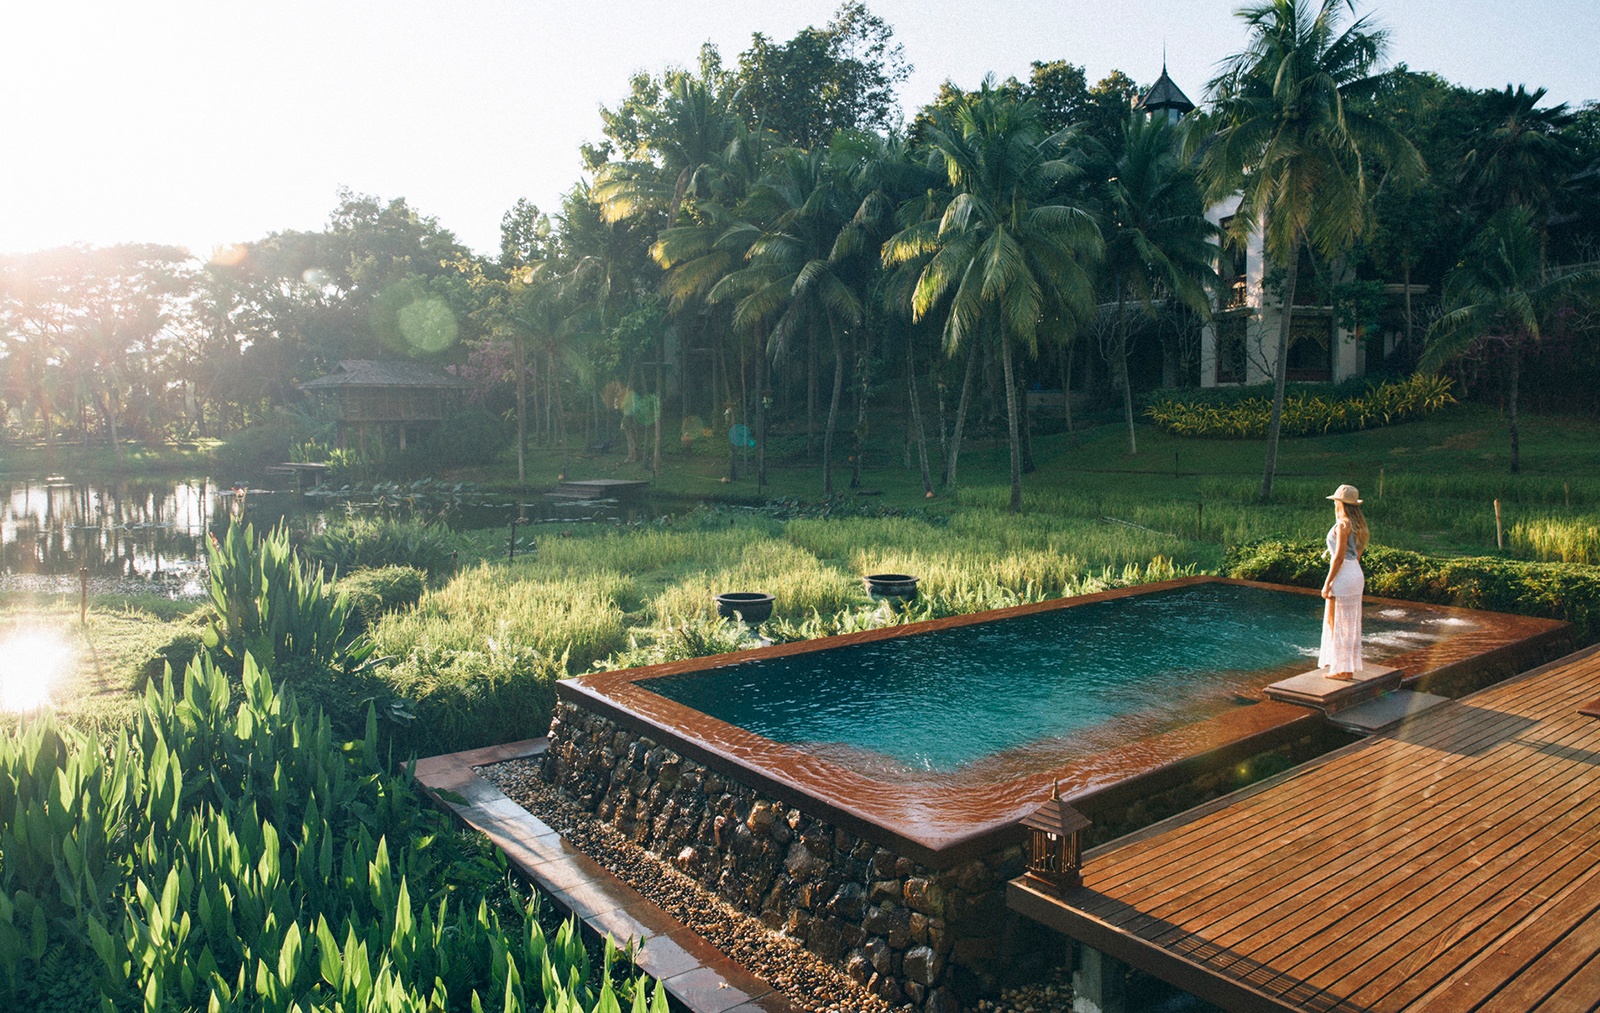 Each bungalow of Four Seasons Resort Chiang Mai comes with a private plunge pool